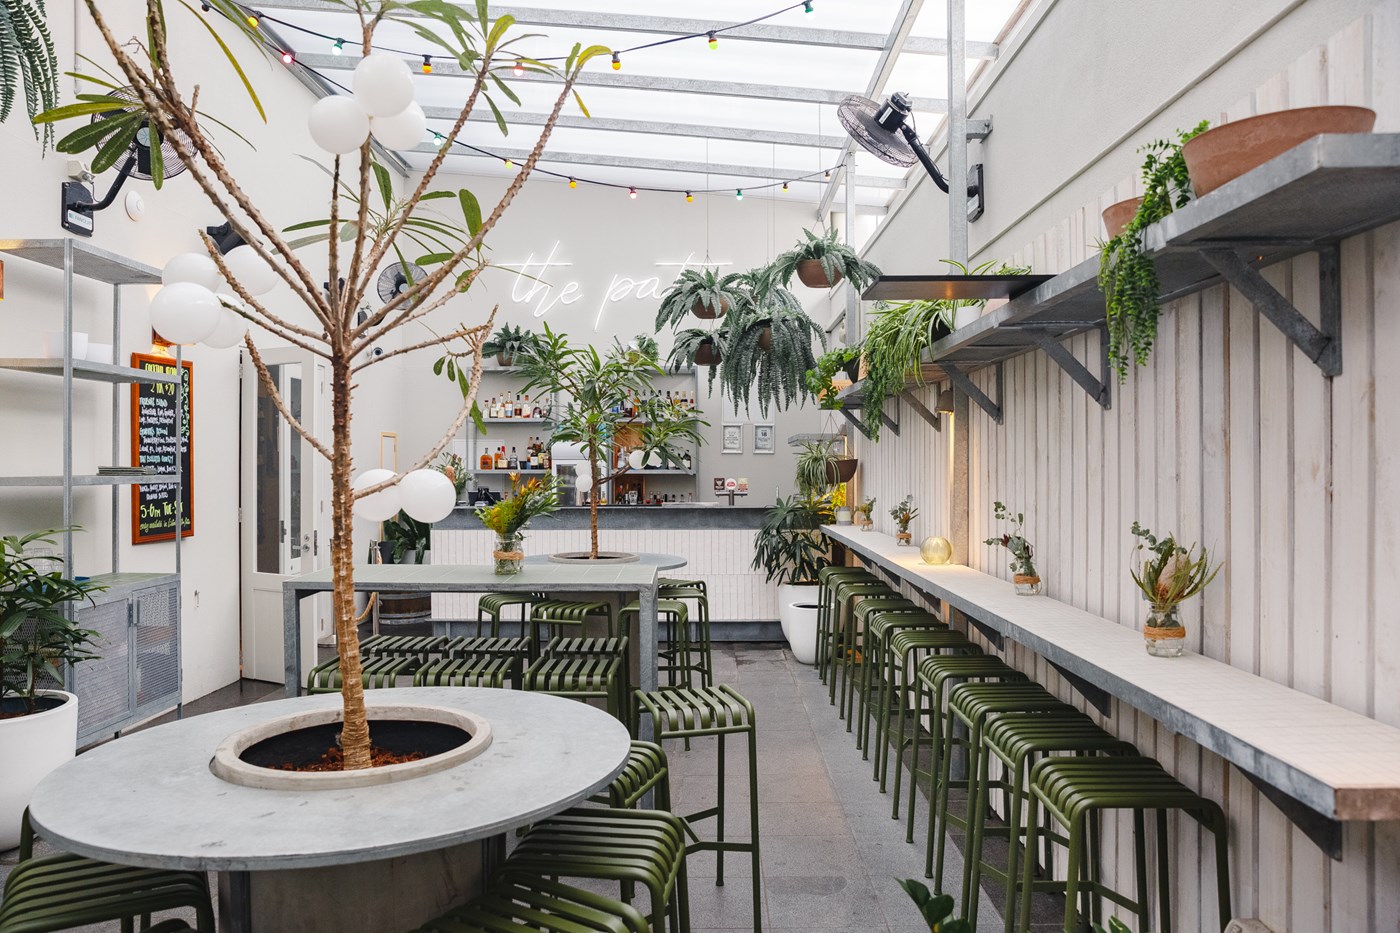 A bright, whitewashed interior featuring plants and green stools.